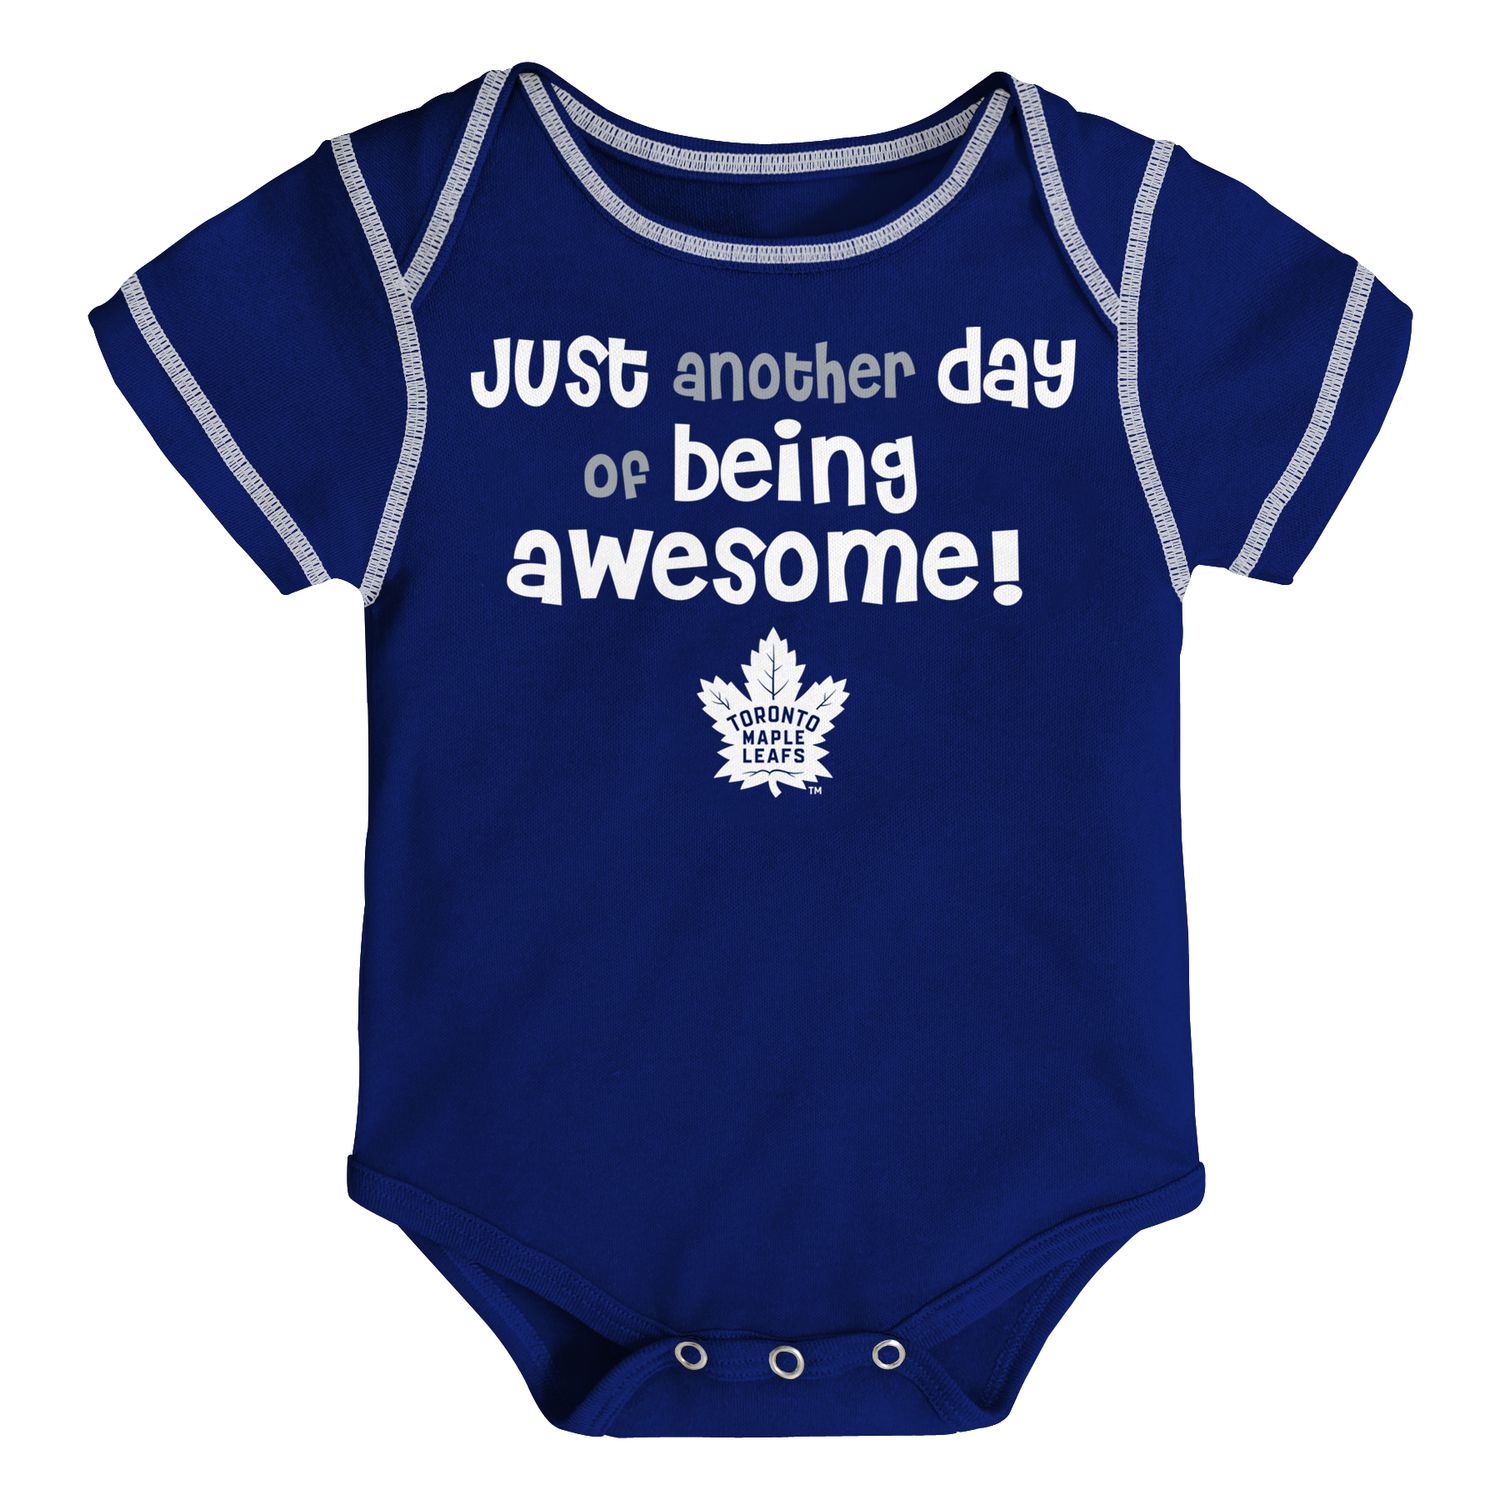 baby girl toronto maple leafs jersey